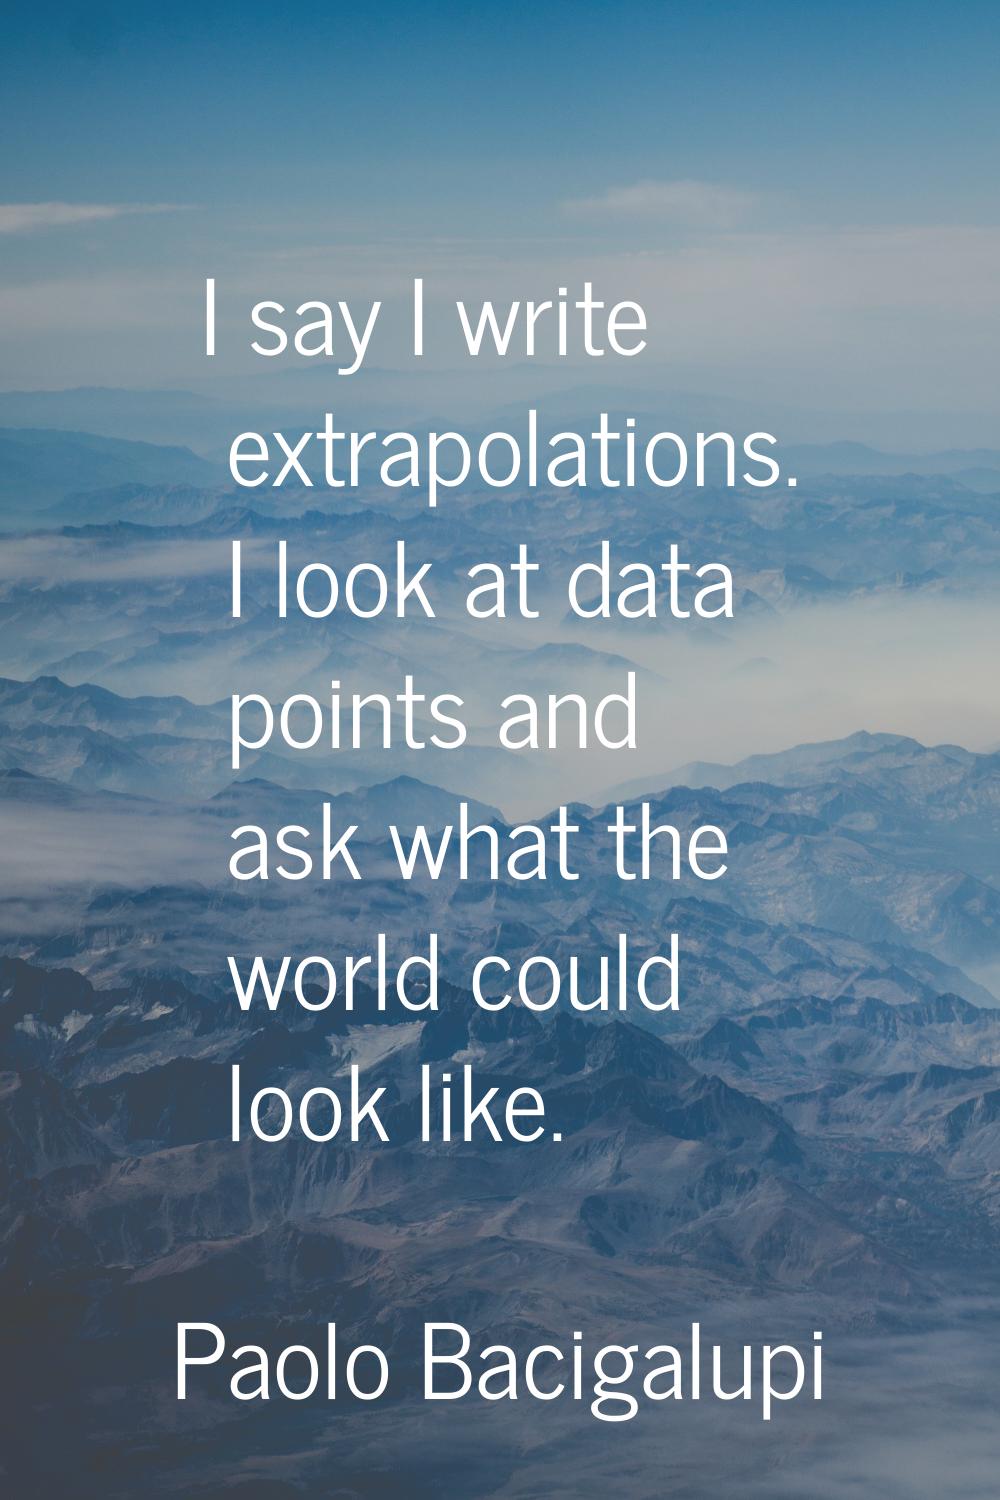 I say I write extrapolations. I look at data points and ask what the world could look like.